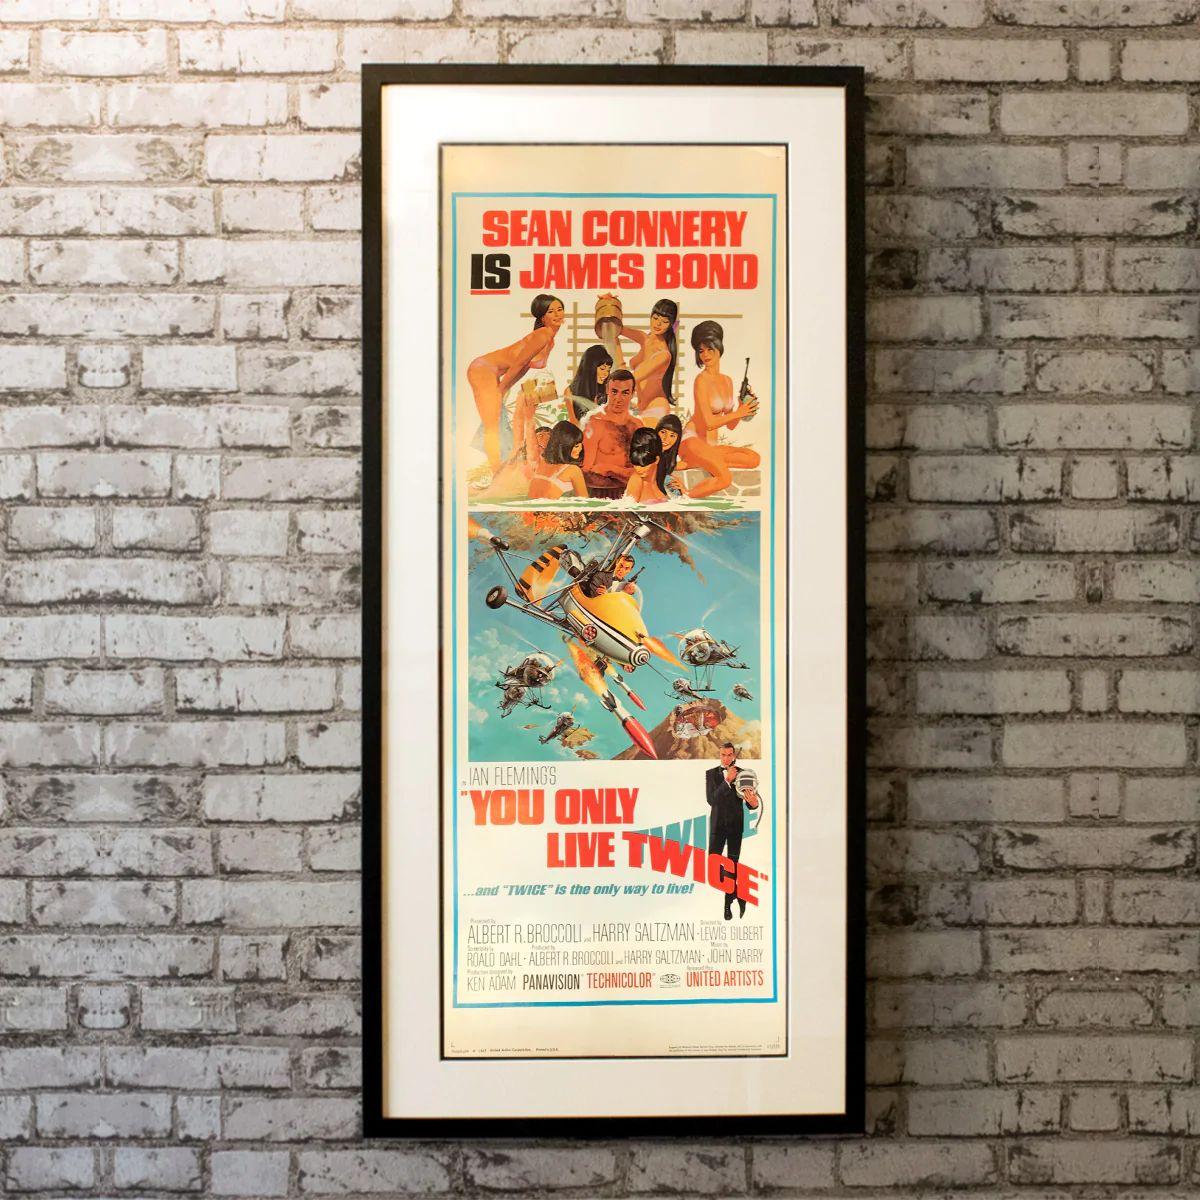 You Only Live Twice, Unframed Poster, 1967

US INSERT (14 x 36 Inches). James Bond and the Japanese Secret Service must find and stop the true culprit of a series of space hijackings, before war is provoked between Russia and the United